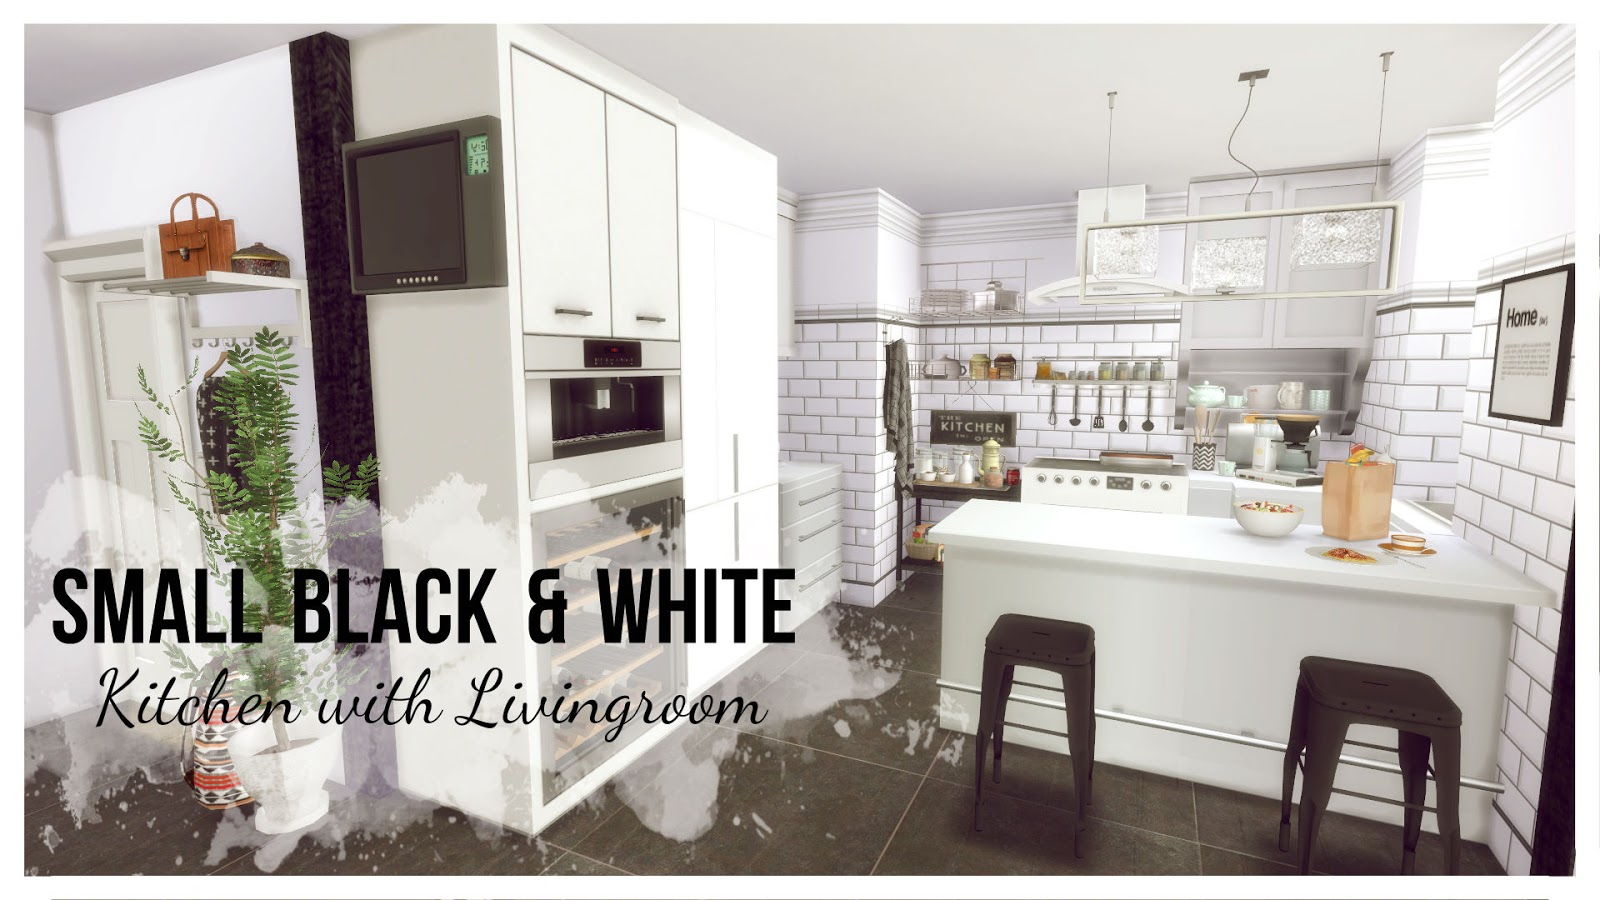  Sims 4 Small Black White Kitchen with Livingroom Room 